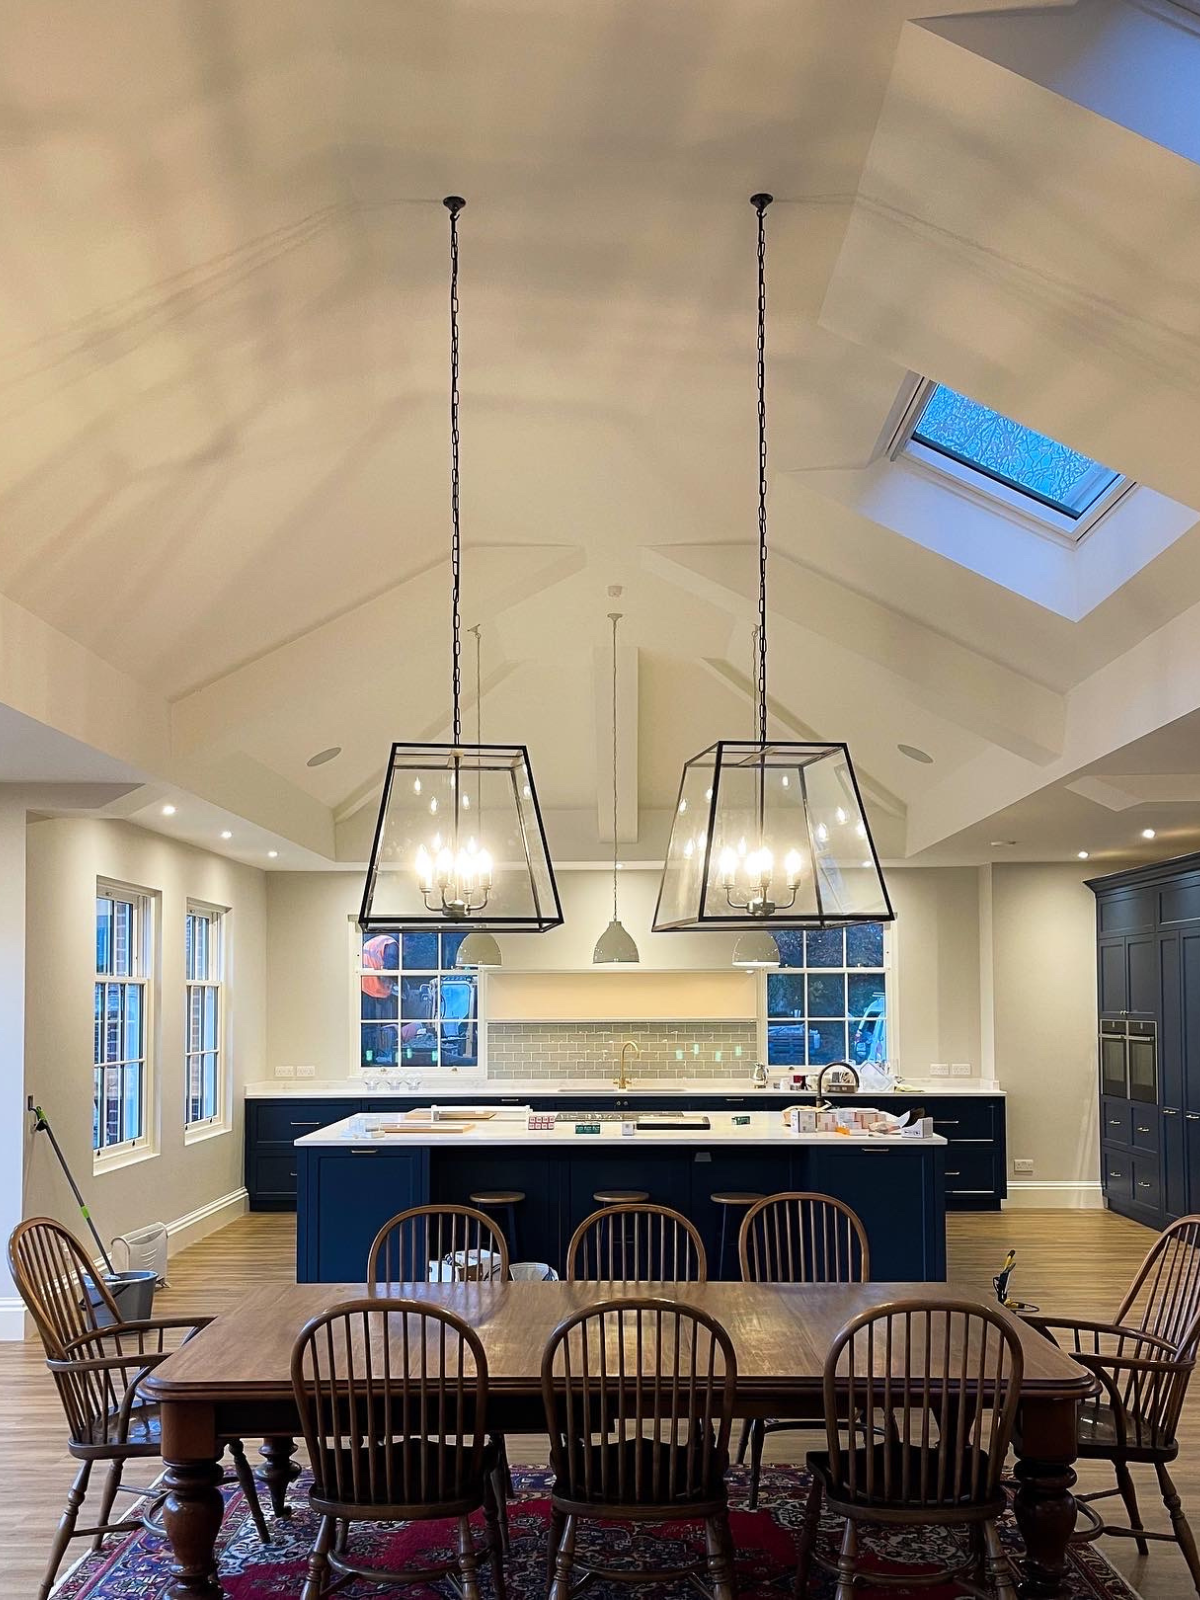 Kitchen and dining room with pendant lighting, dining room table and in-ceiling speakers